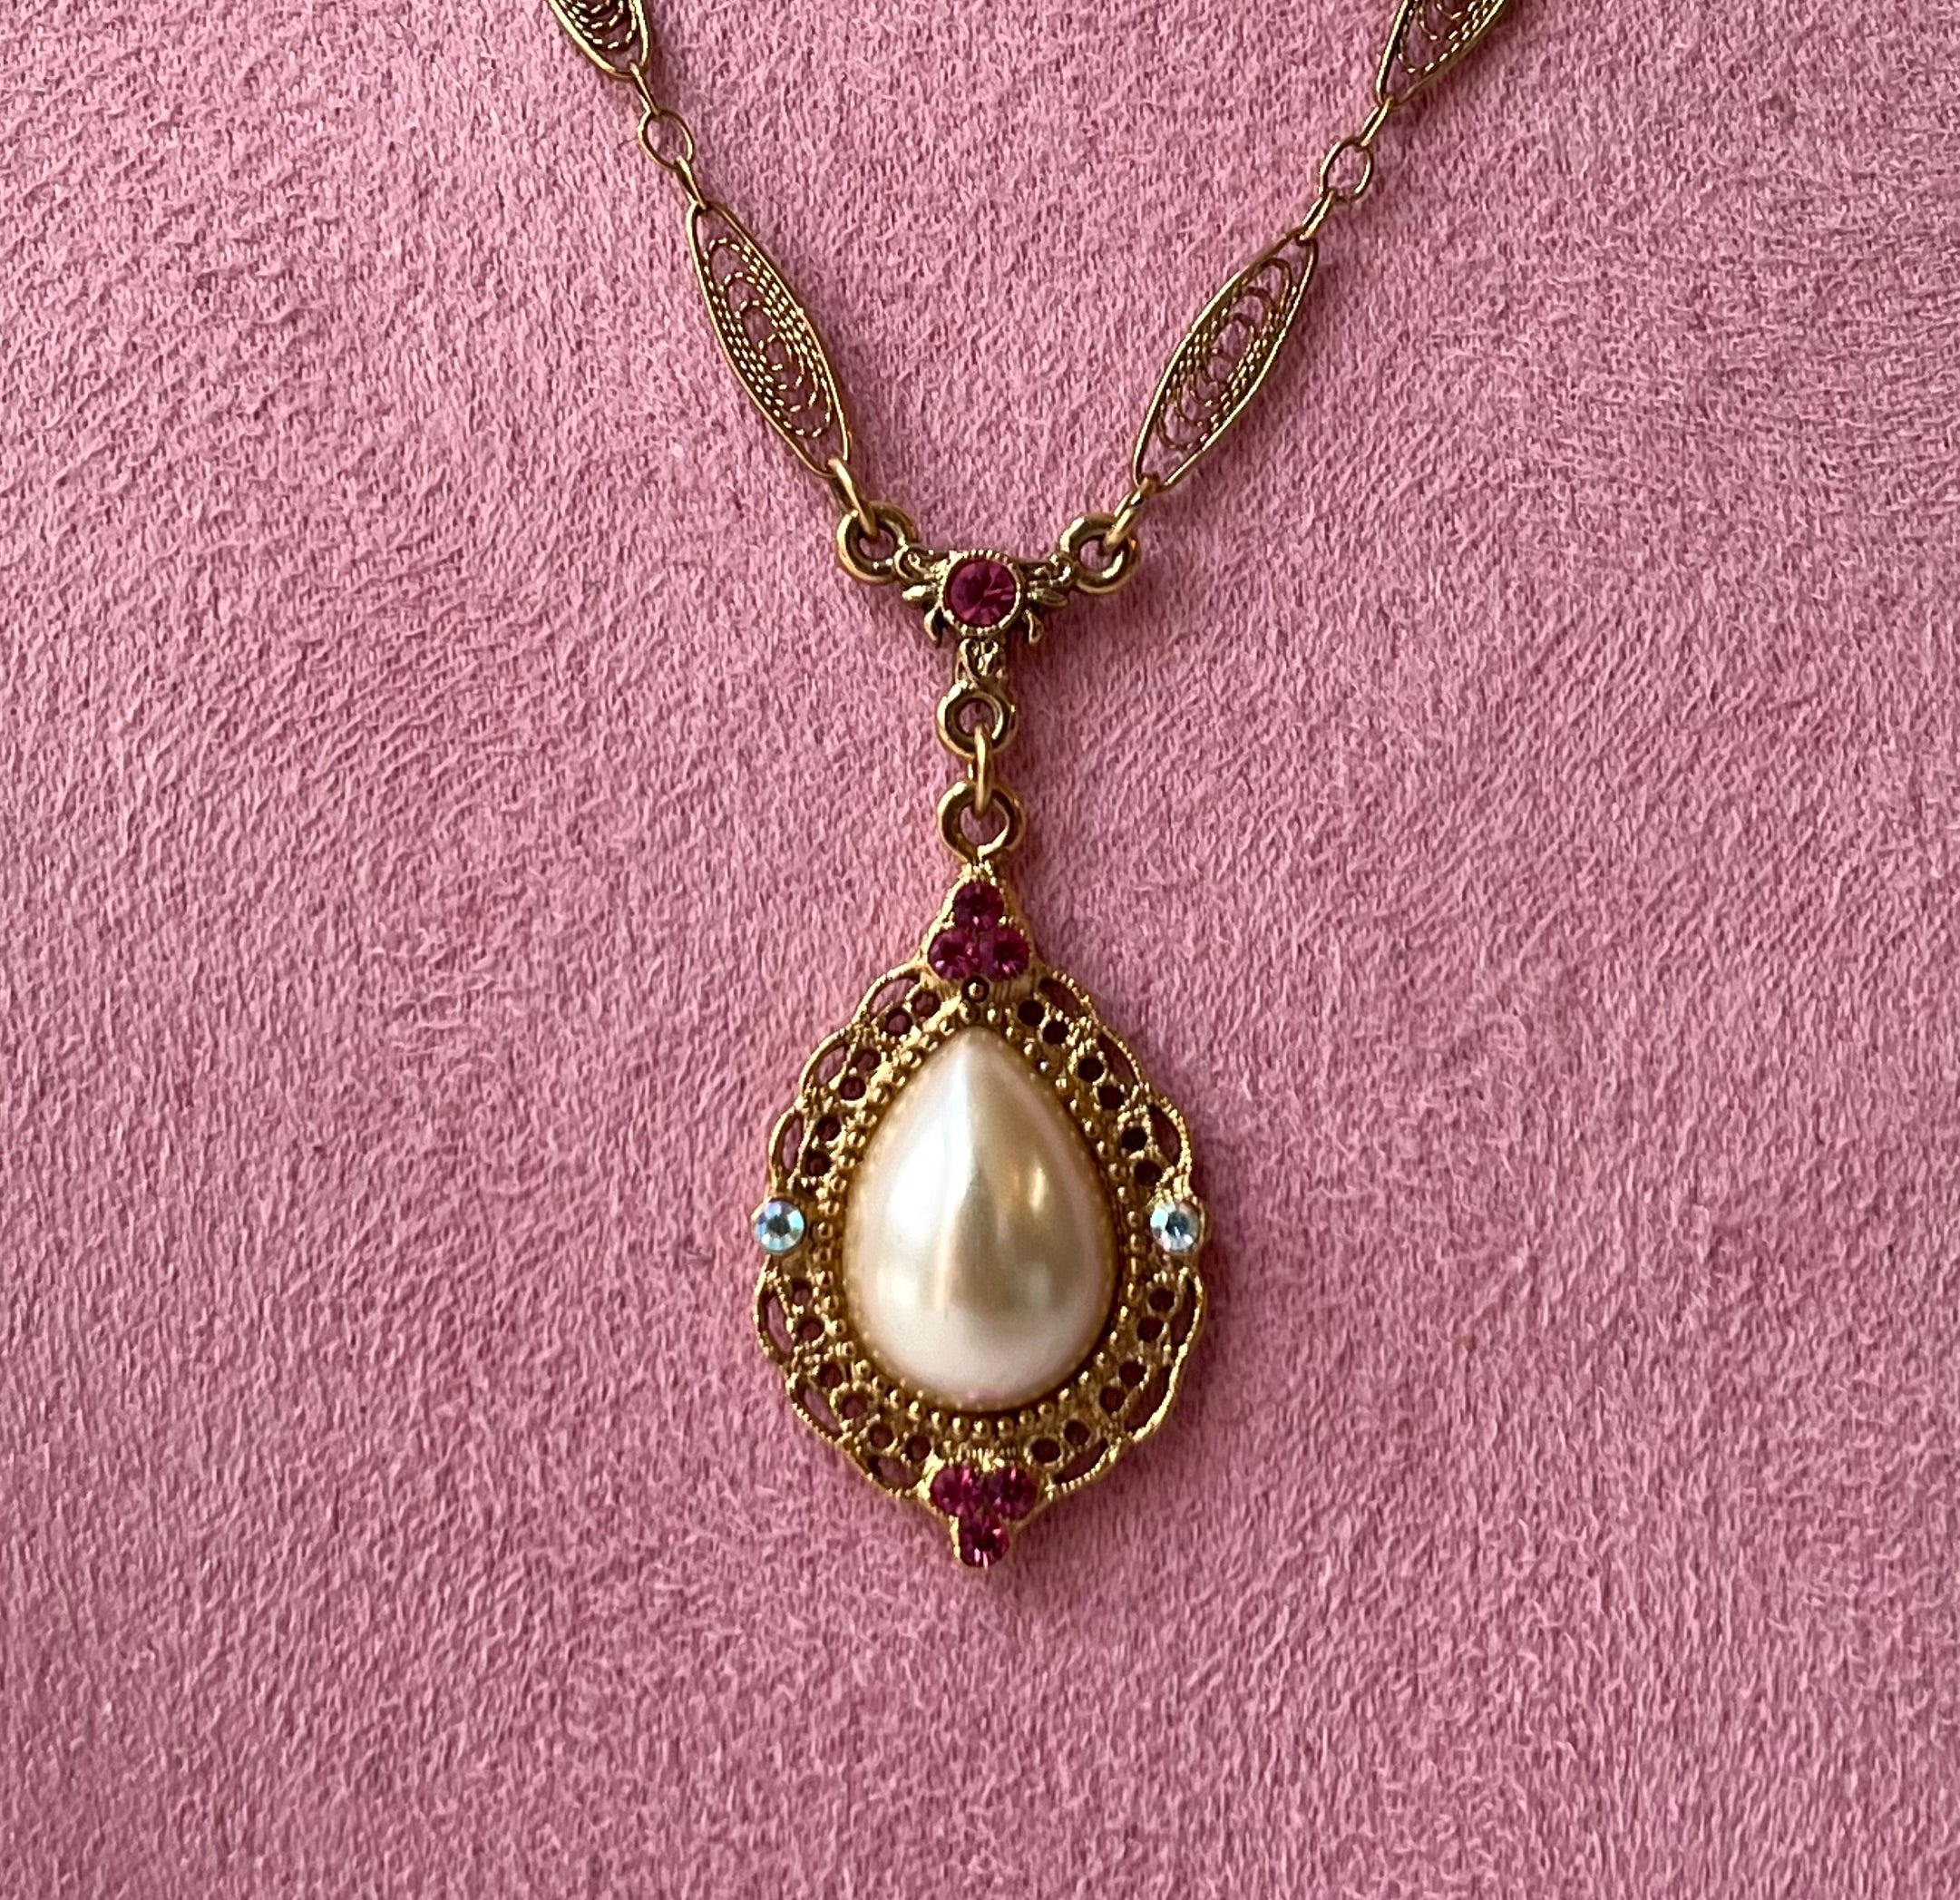 1928 Jewelry & Co. Faux Pearl Filigree Pendant Necklace